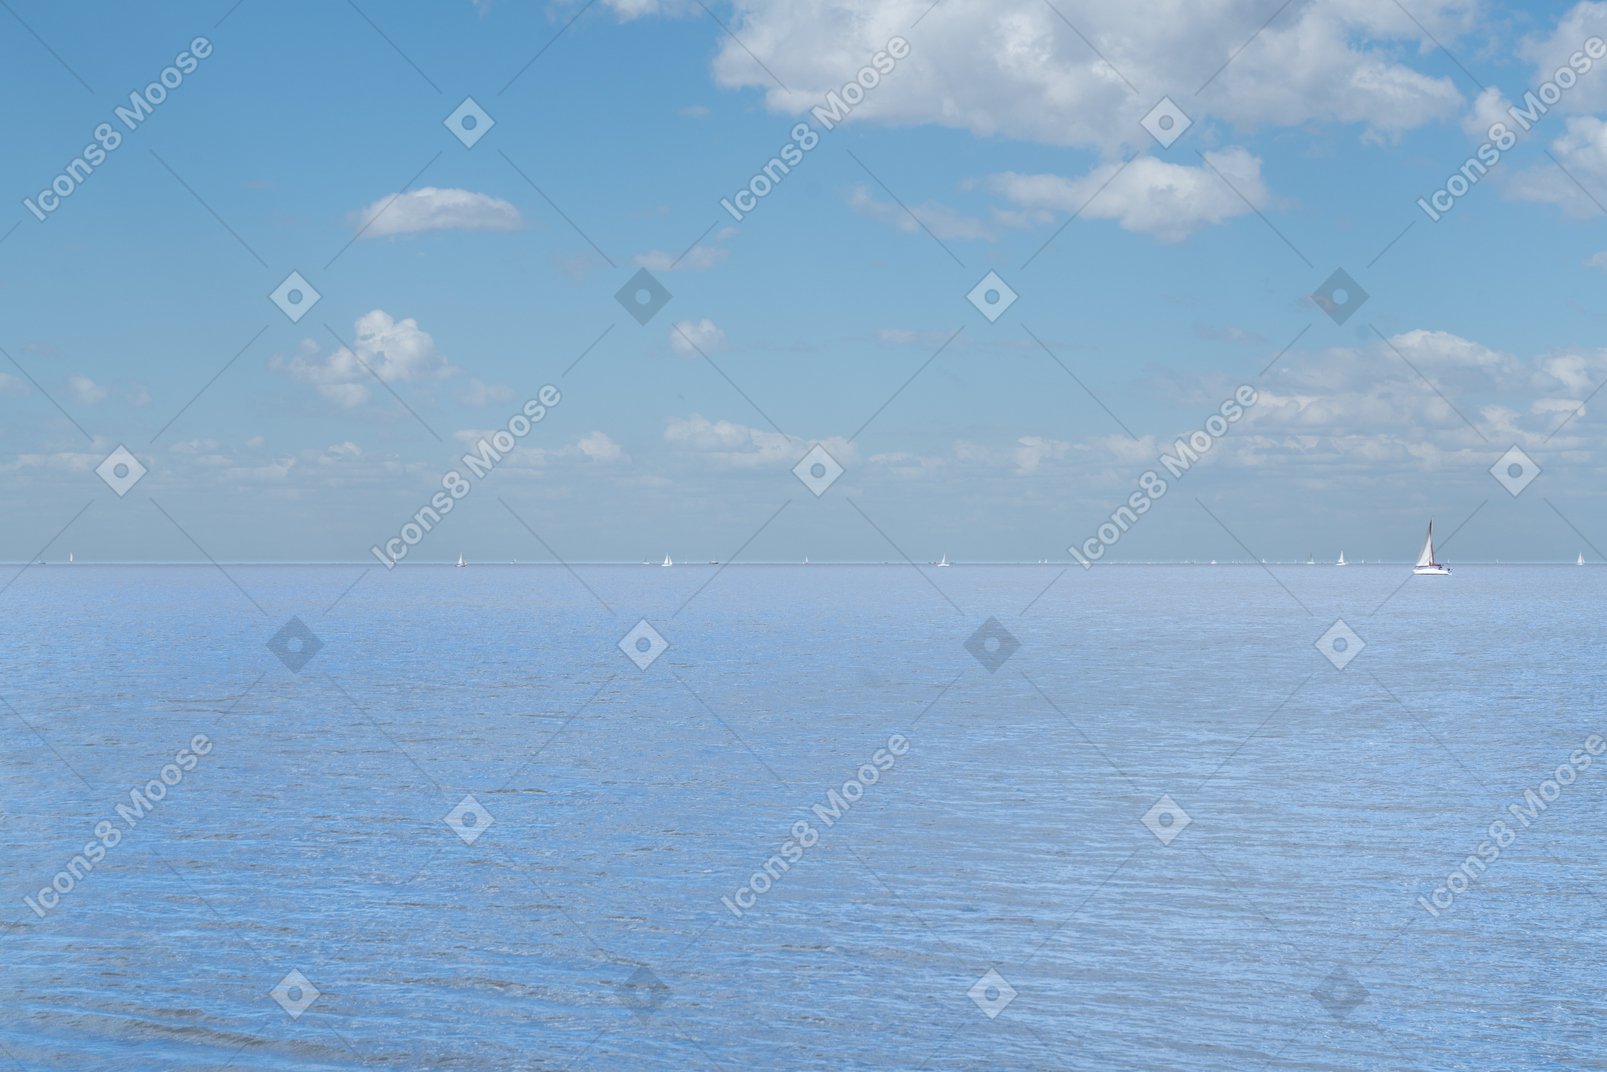 Sailing yachts in the sea